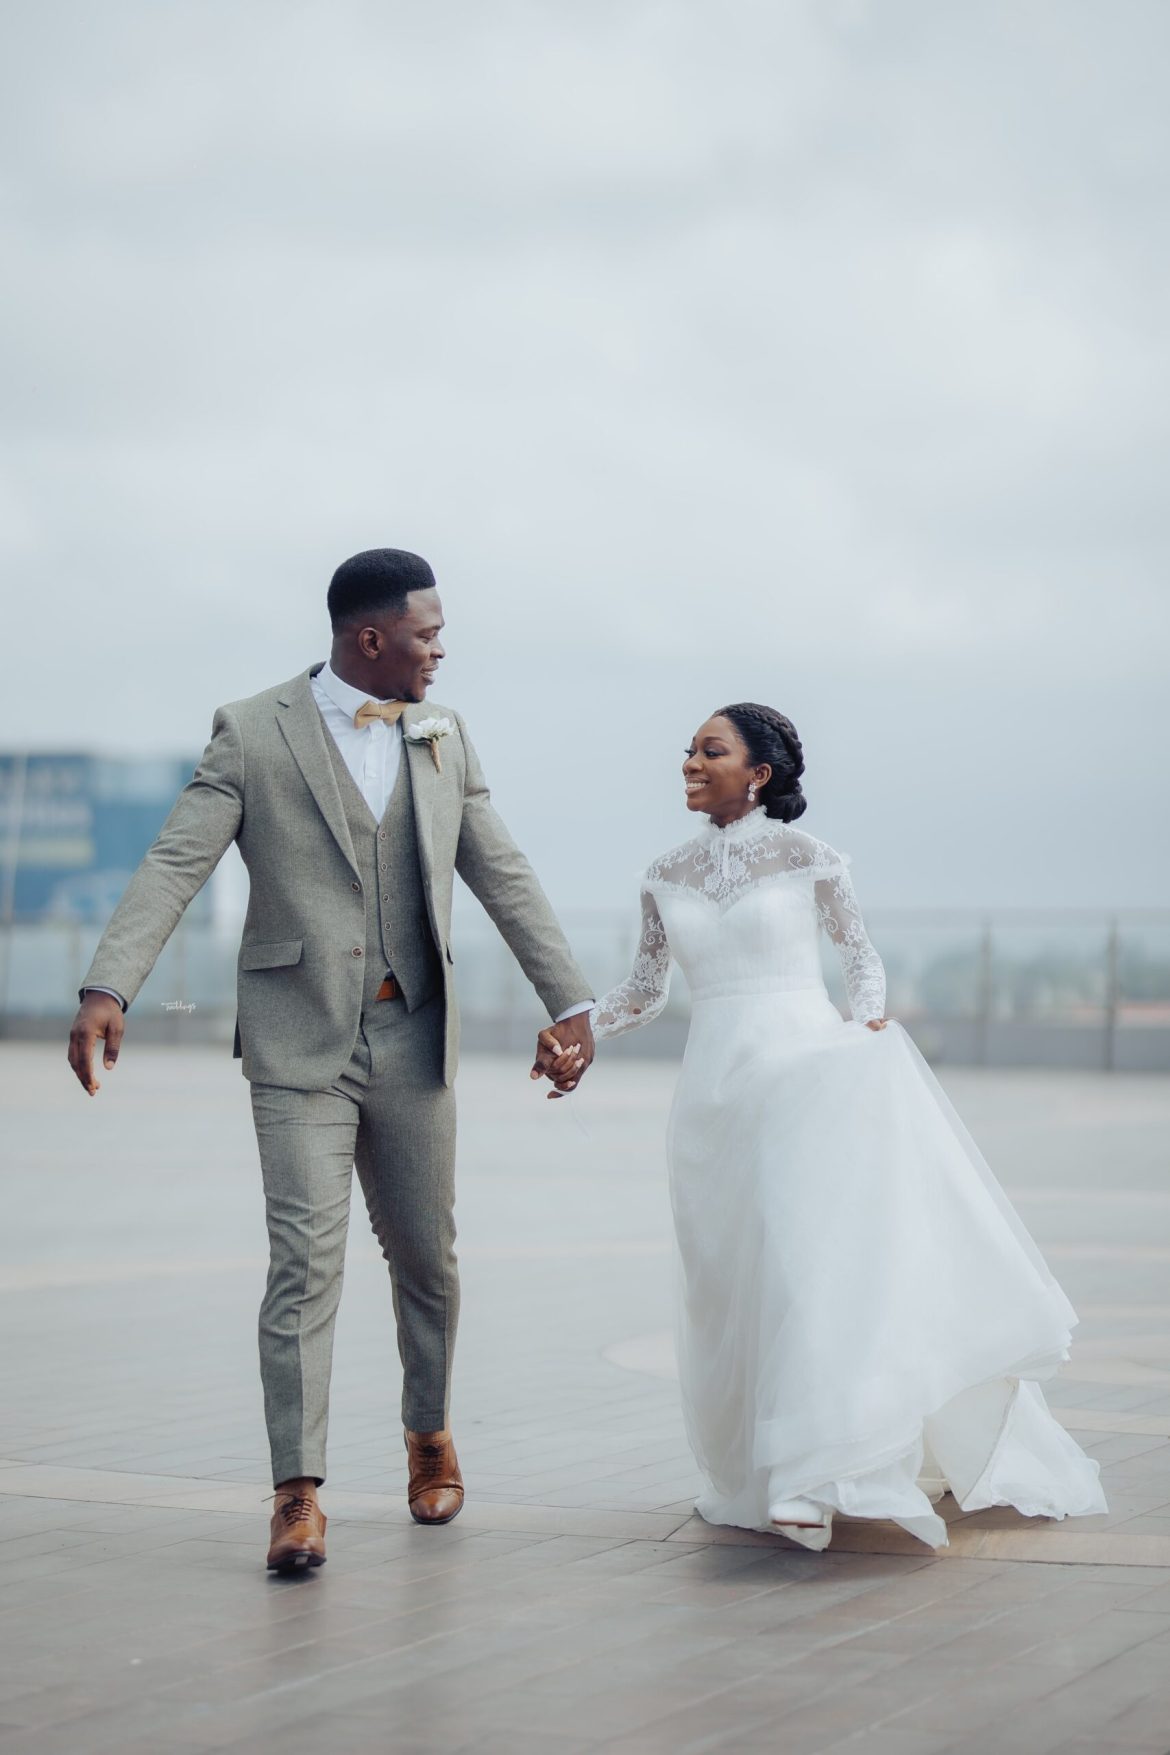 Aramide and Ademola’s Love Journey Began With a DM 5 Years Ago!